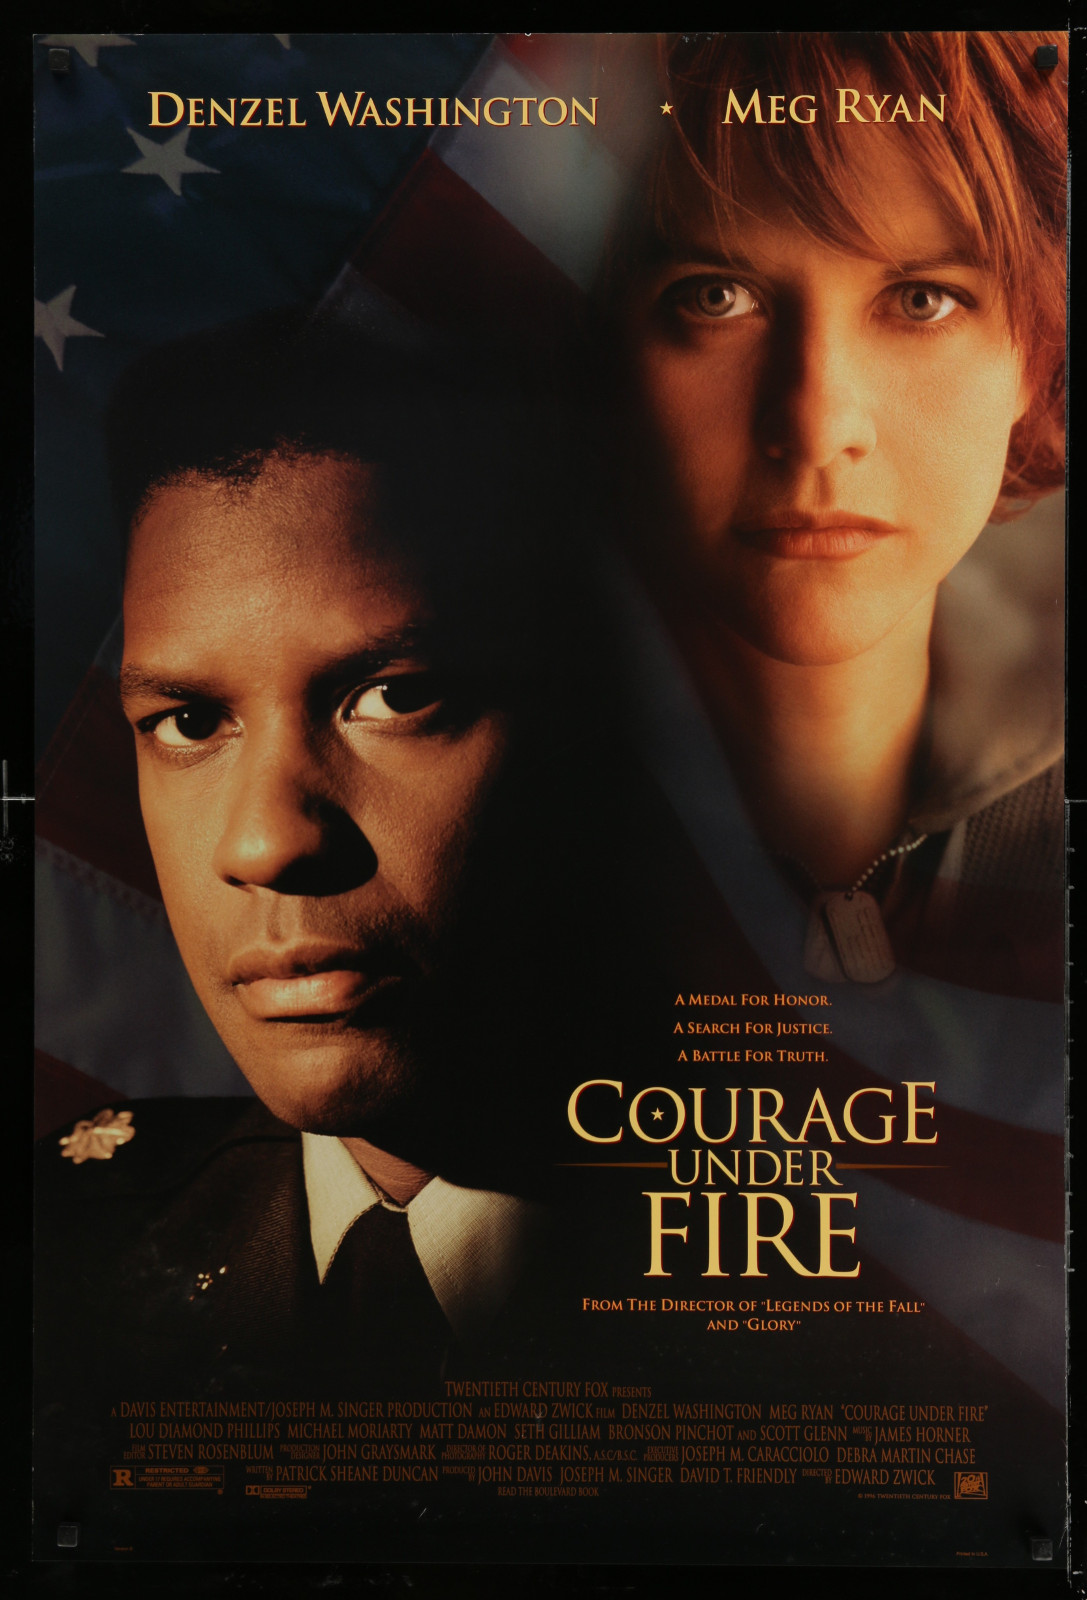 Courage Under Fire 2A391 A Part Of A Lot 24 Unfolded Double-Sided 27X40 One-Sheets '90S-00S Great Movie Images!